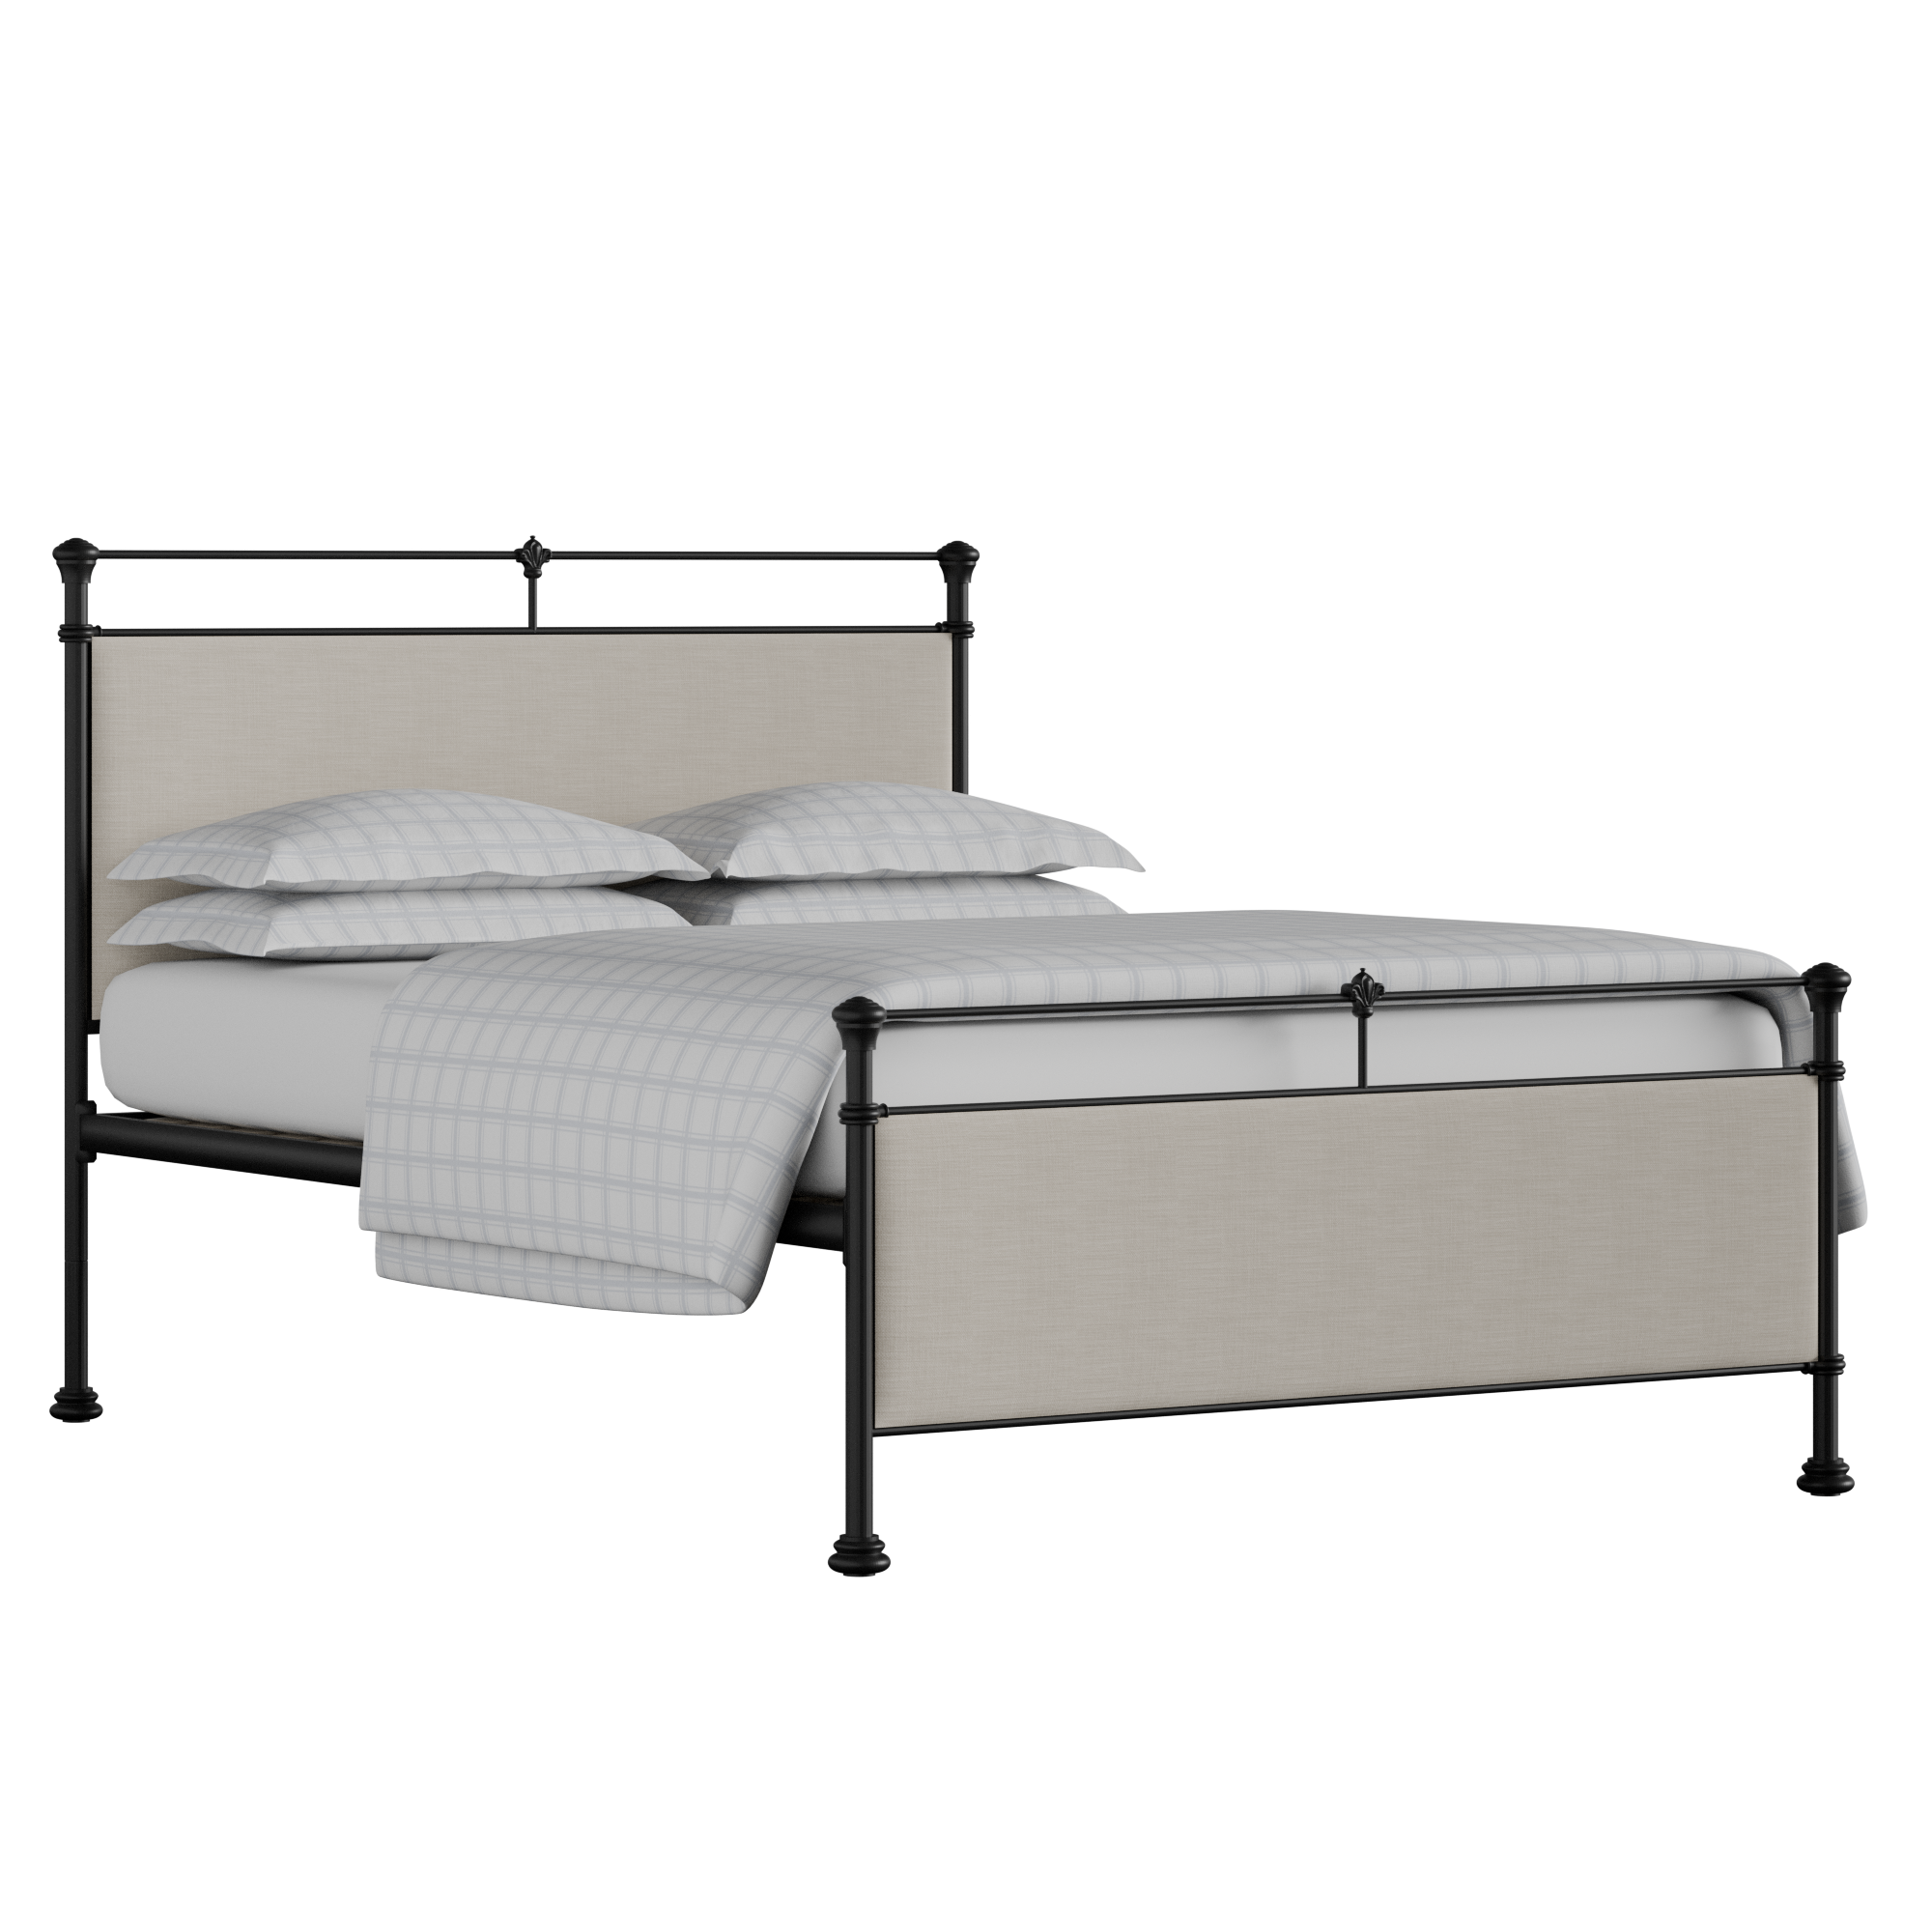 Nancy iron/metal upholstered bed in black with mist fabric